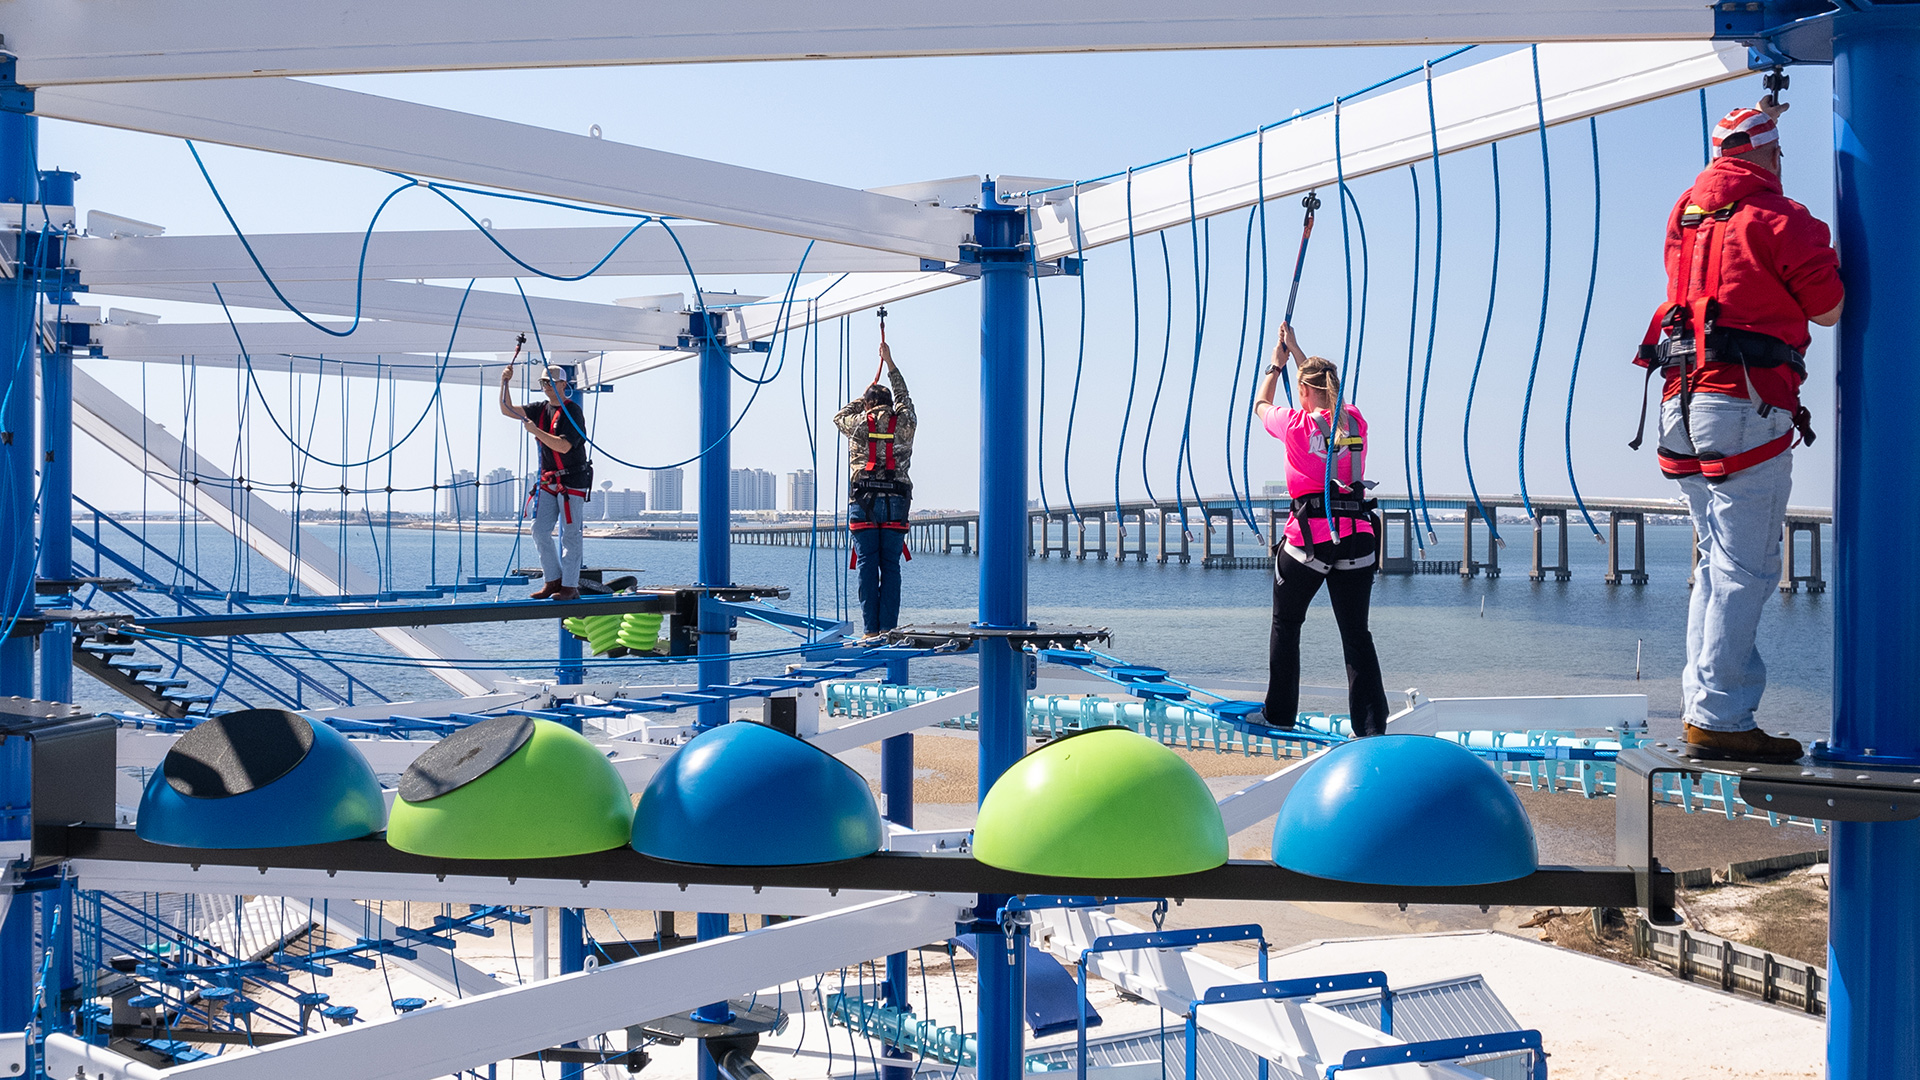 Four people balance on different obstacles on the top level of Navarre Family Watersports' ropes course with Navarre Bridge and beach in the background